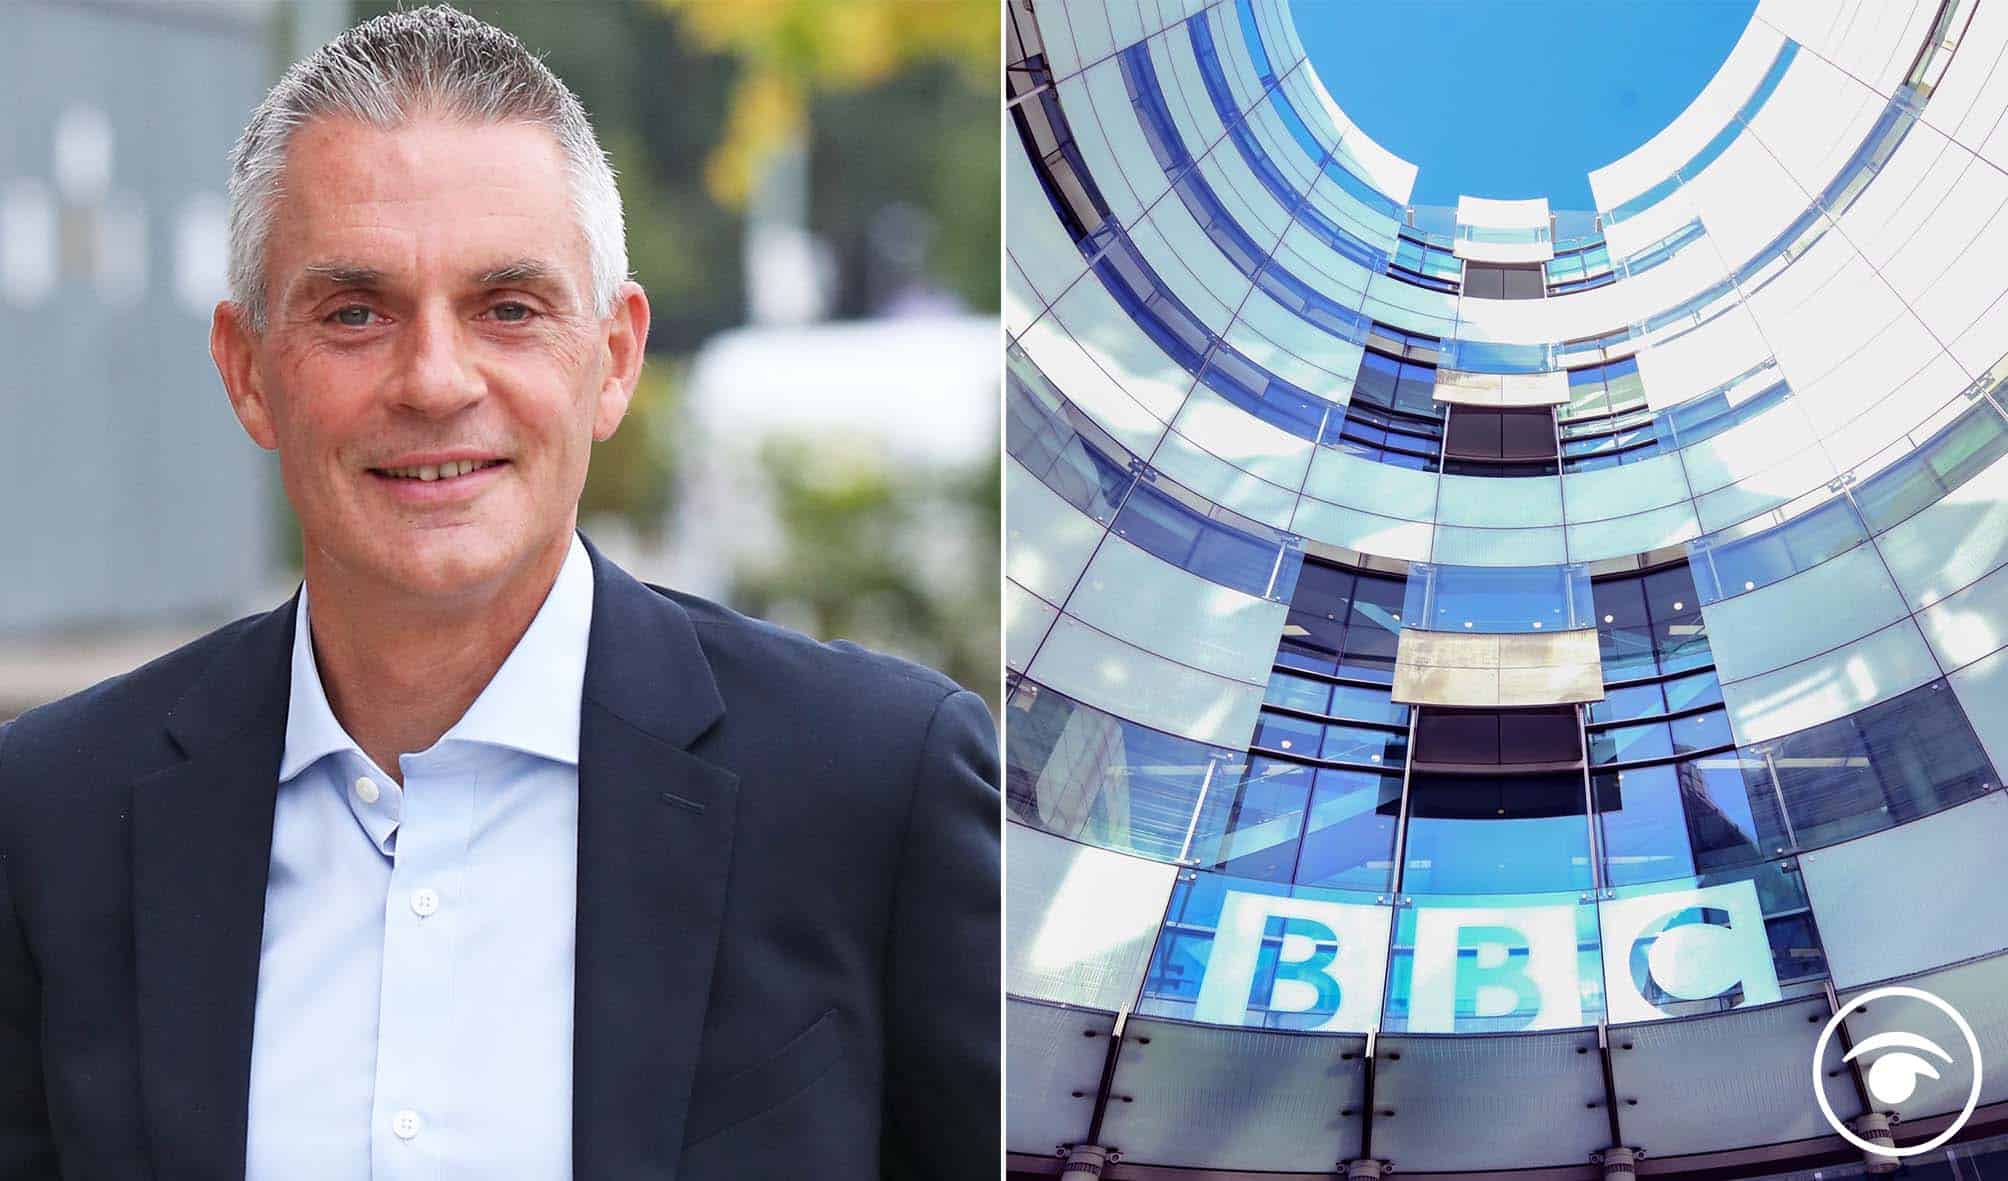 Social media comments on Israel by some journalists ‘unacceptable’ says BBC boss